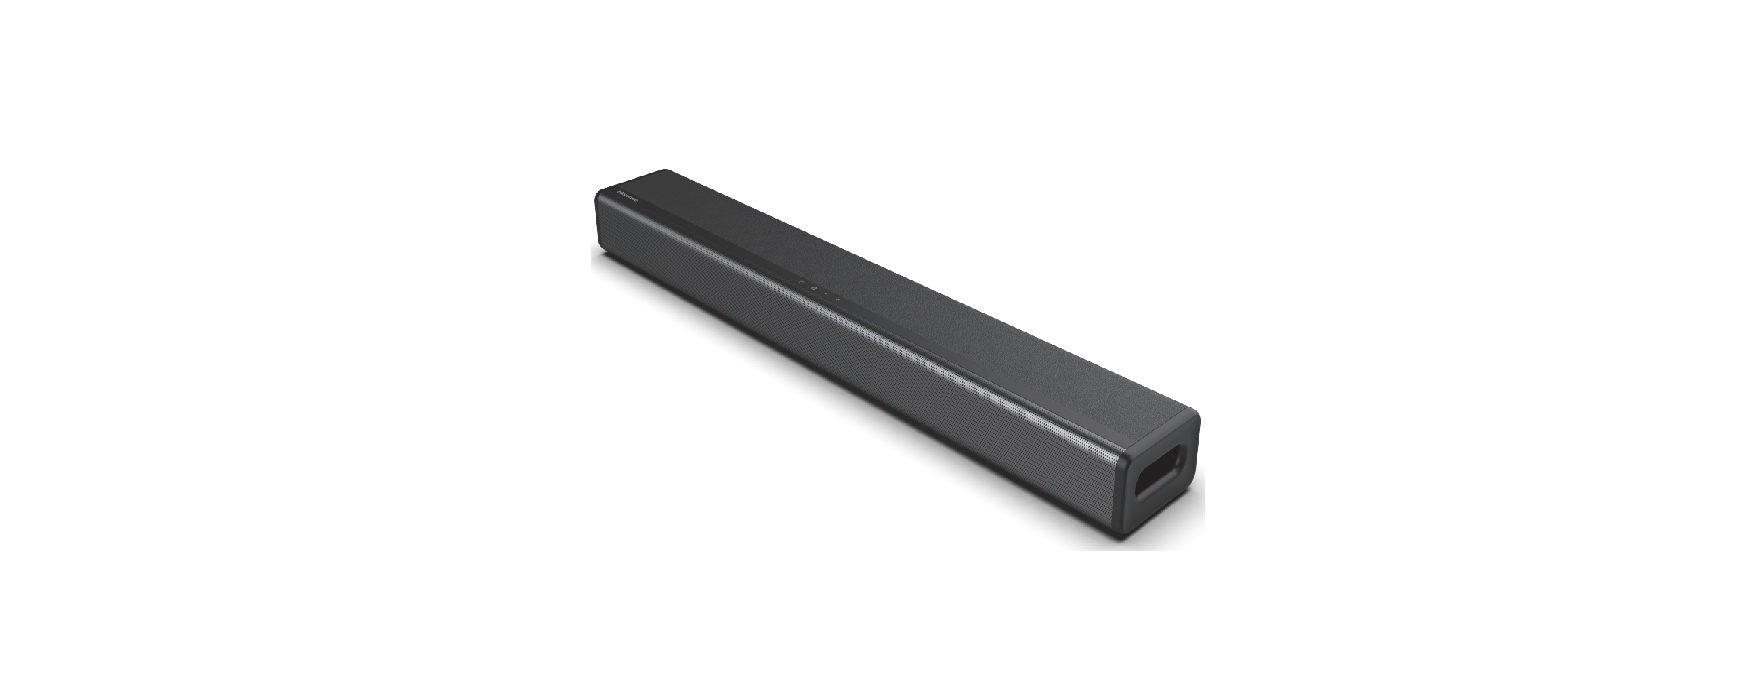 You are currently viewing Hisense HS214 2.1 Channel Sound Bar User Manual